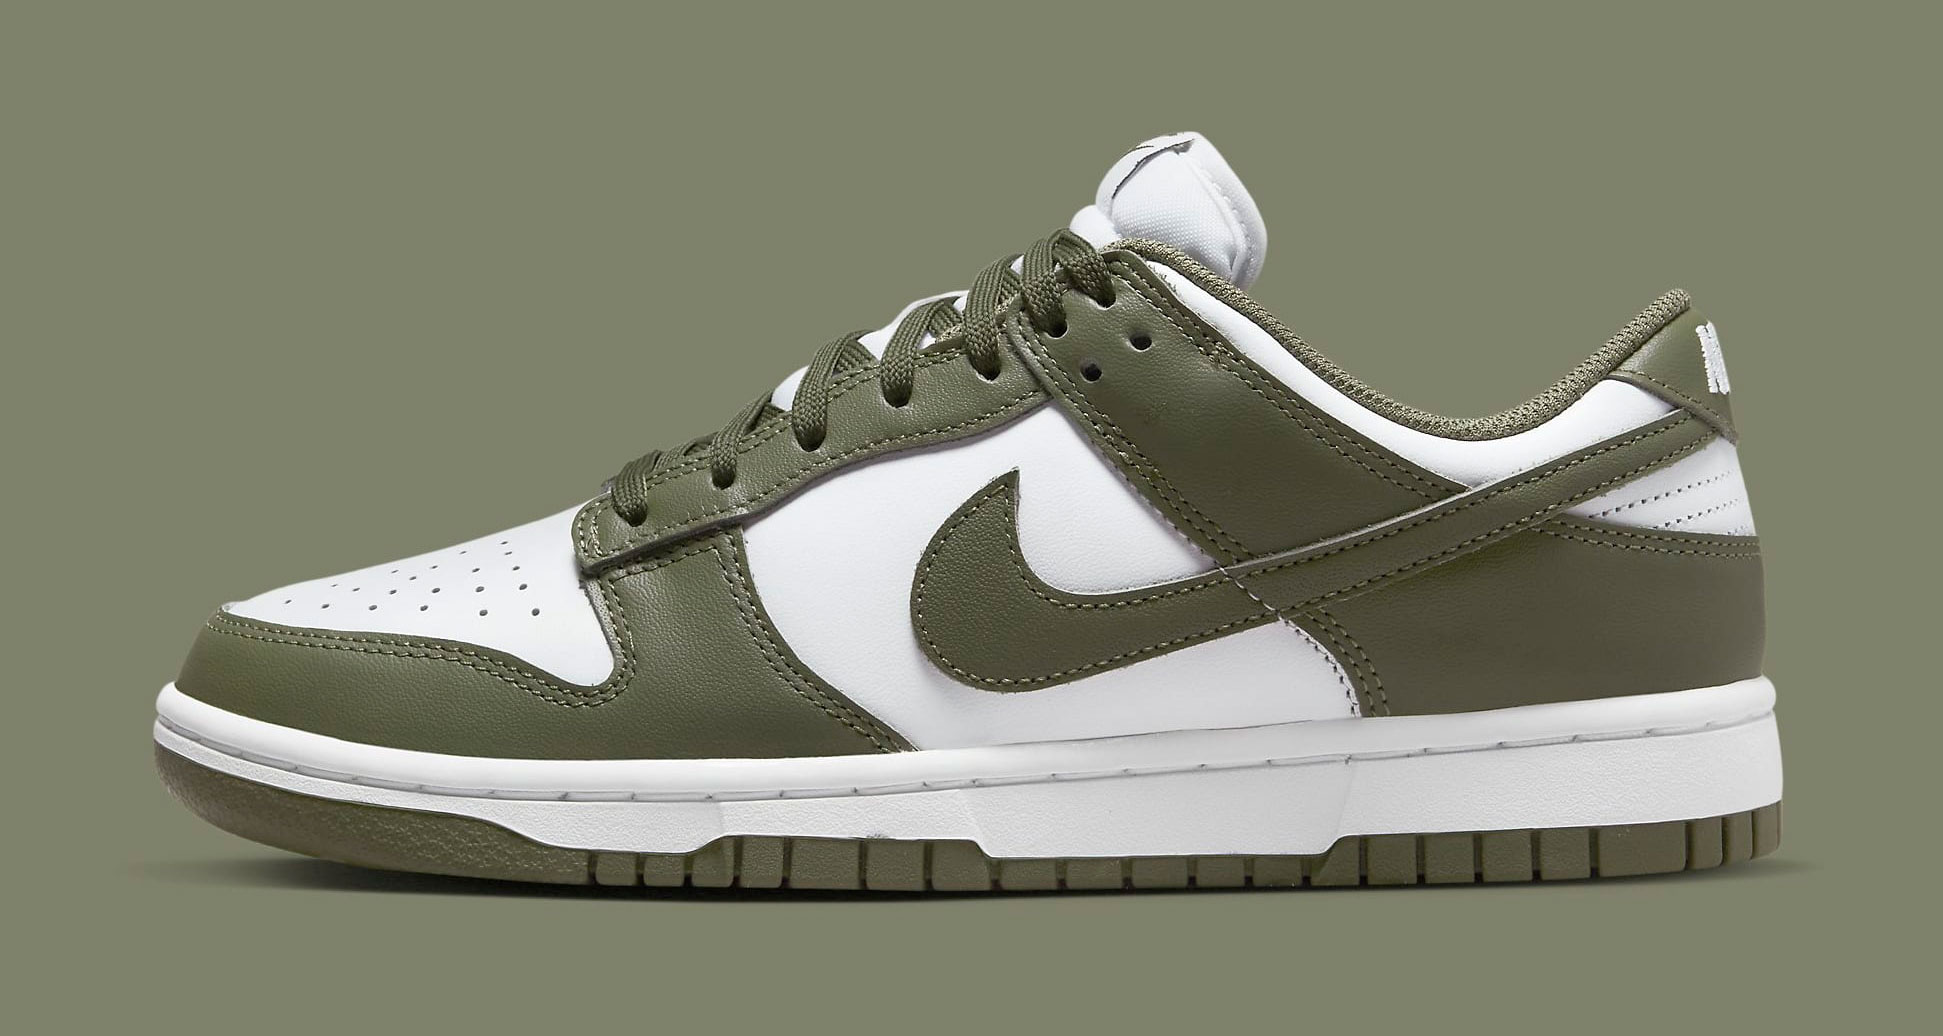 Where To Buy The WMNS Nike Dunk Low “Medium Olive” Restock